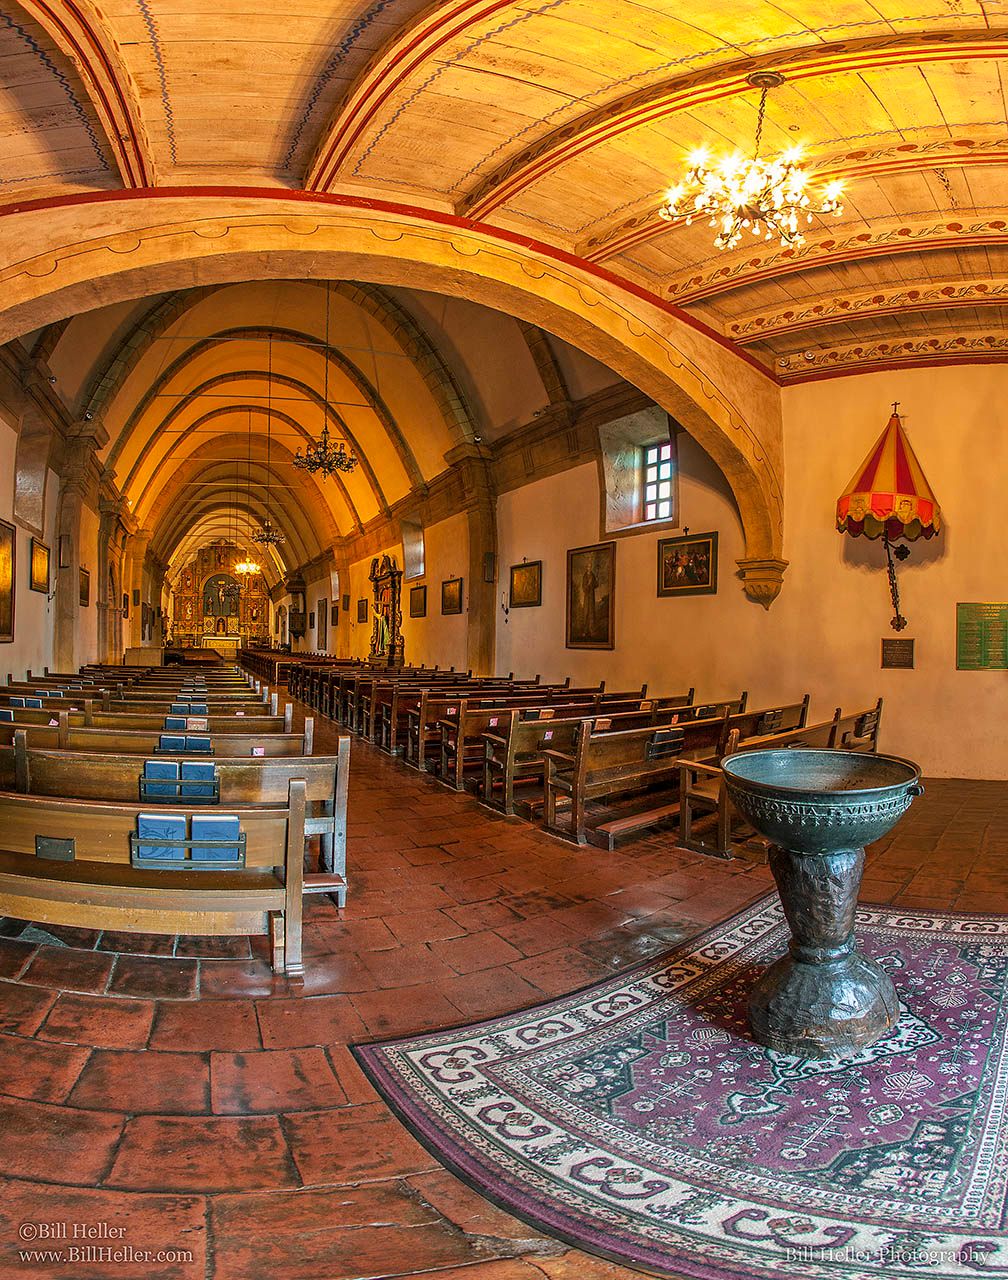 Sanctuary-at-the-Carmel-Mission-by-Bill-Heller-IMG_16526_max1280x1024.jpg